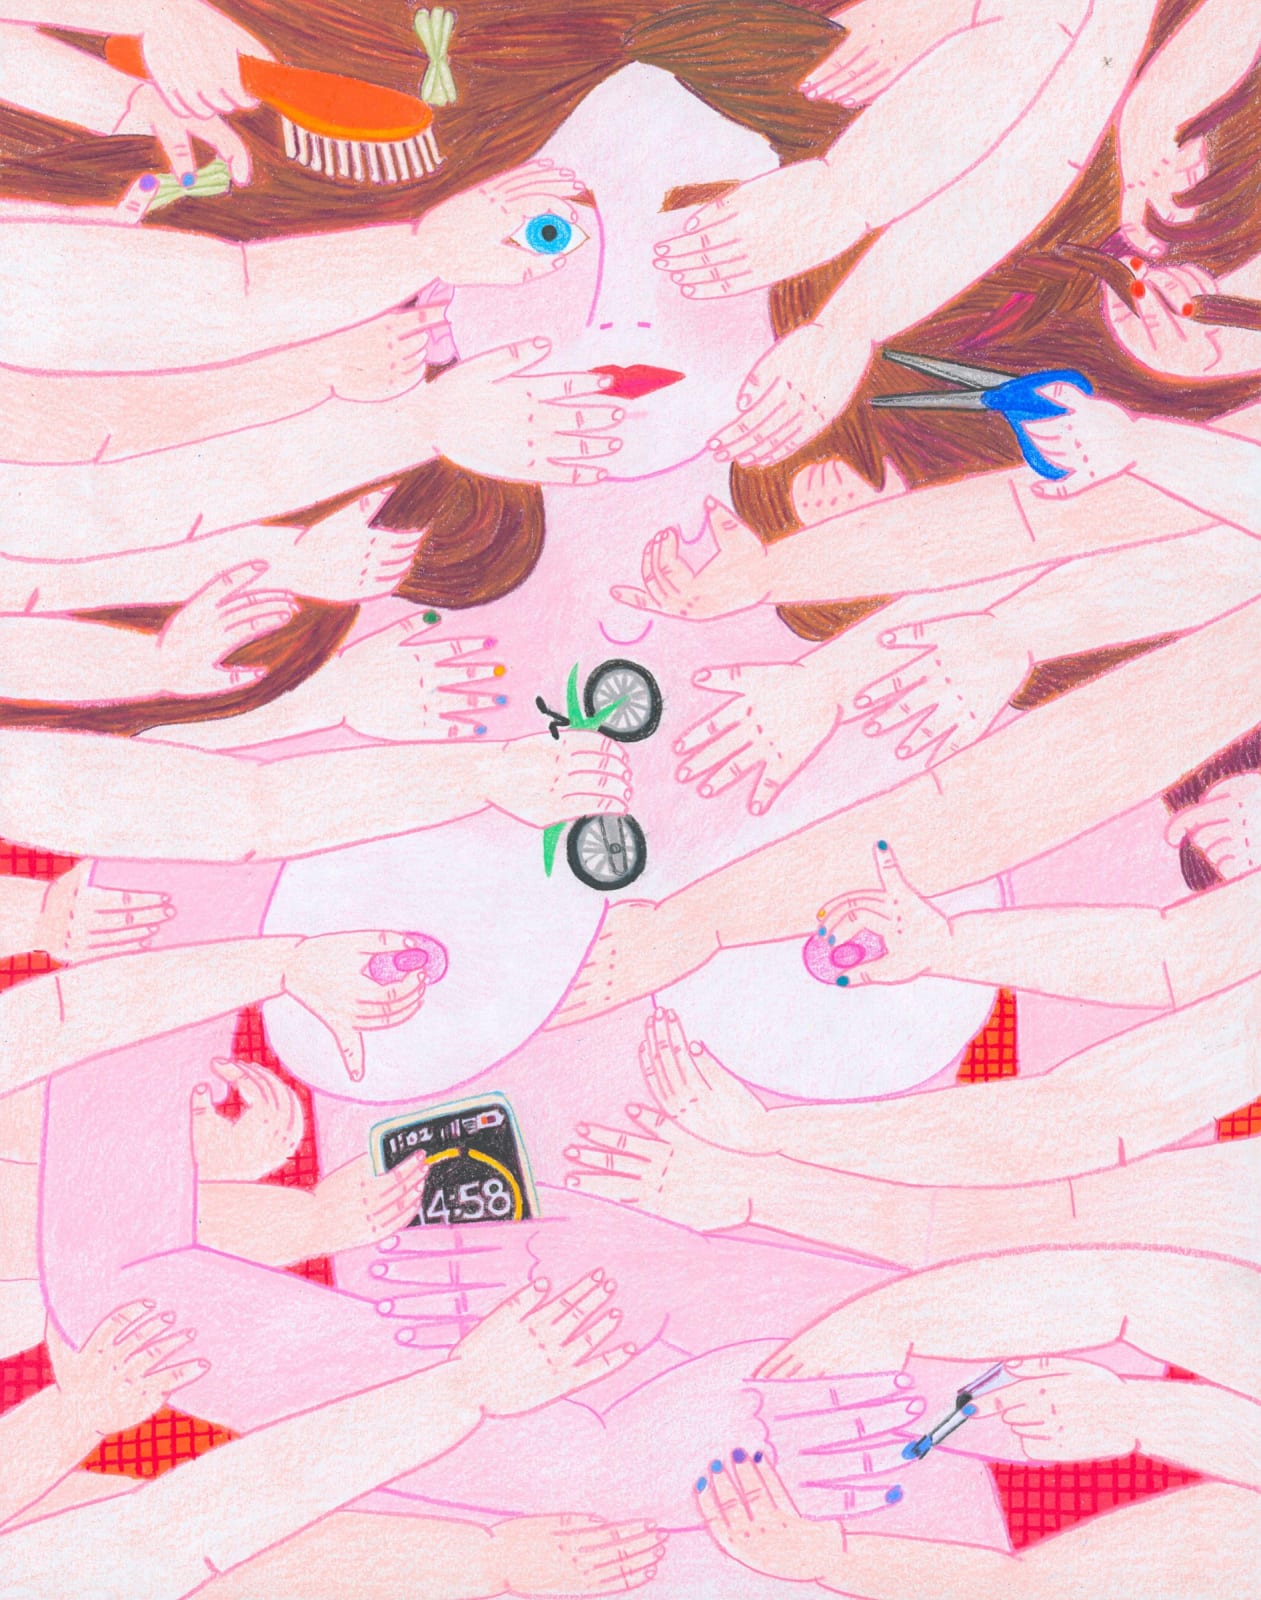 Drawing of the artist as she lays naked clutching her phone set on a timer, as her nap is interrupted by several childlike hands touching her face and breast. A bike, scissors, barrettes, and hairbrush are held by the children’s hands against the artist’s pink body.  